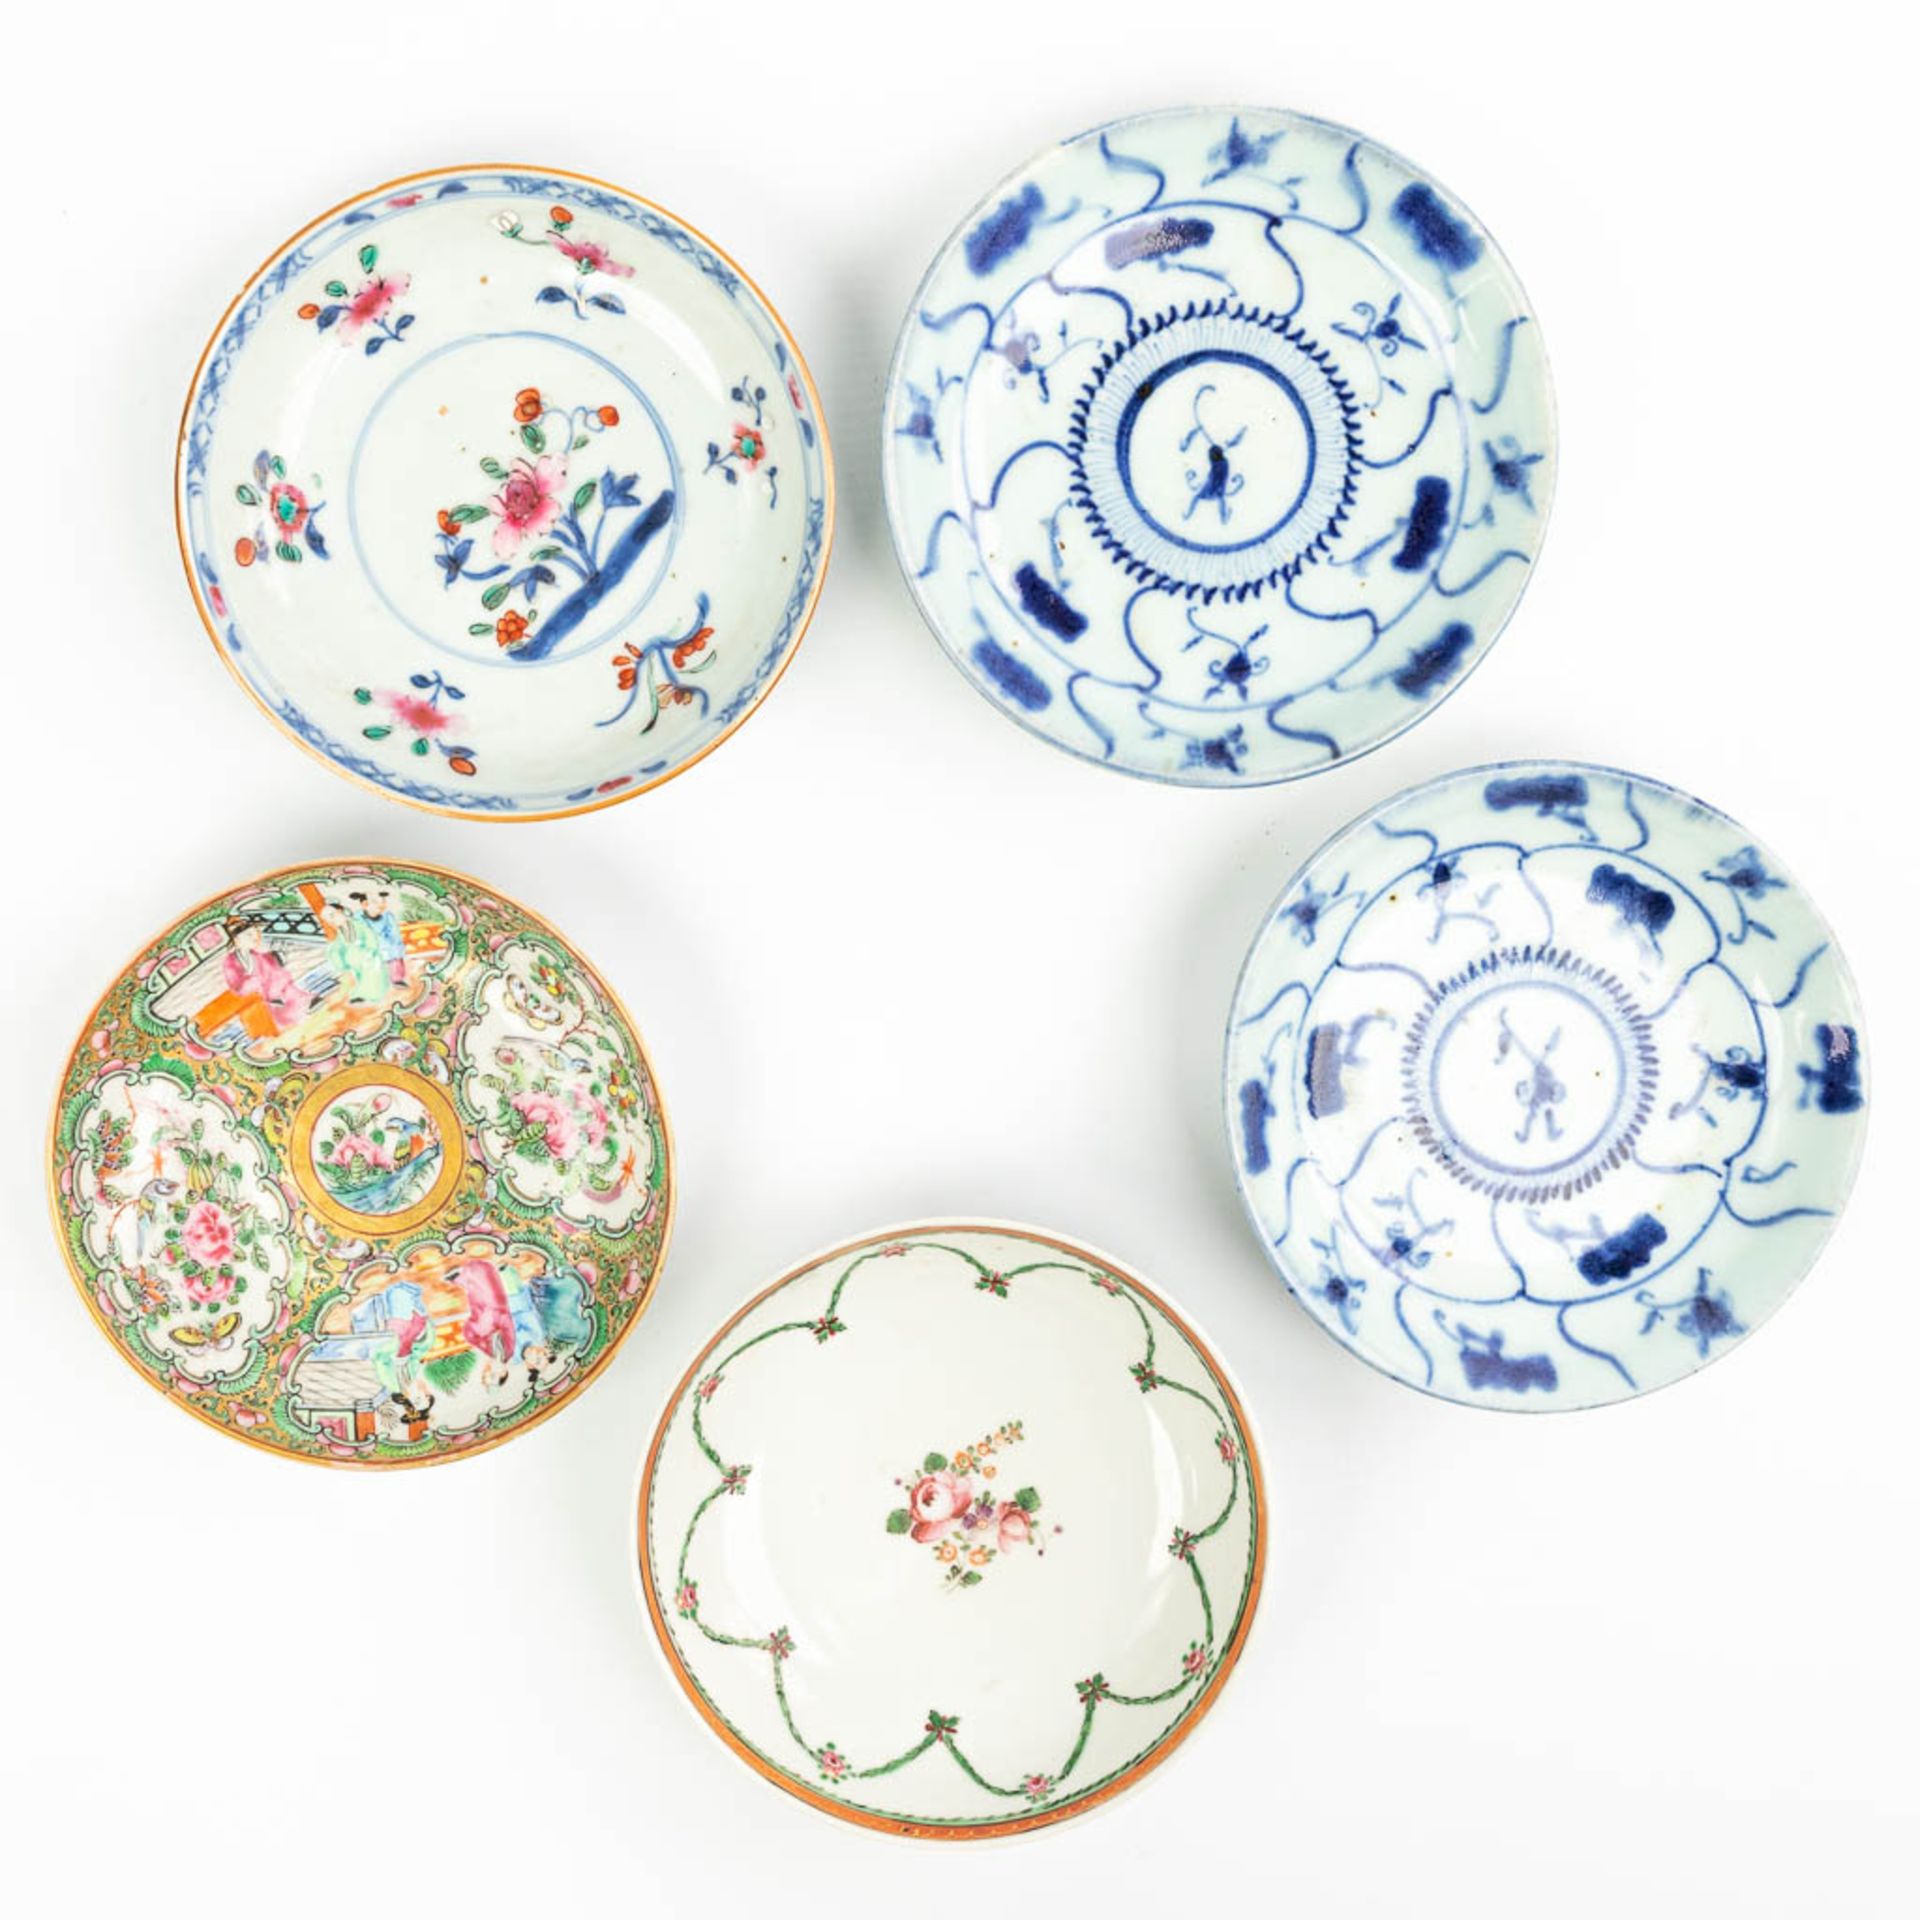 A collection of 5 plates made of Chinese porcelain with different patterns.